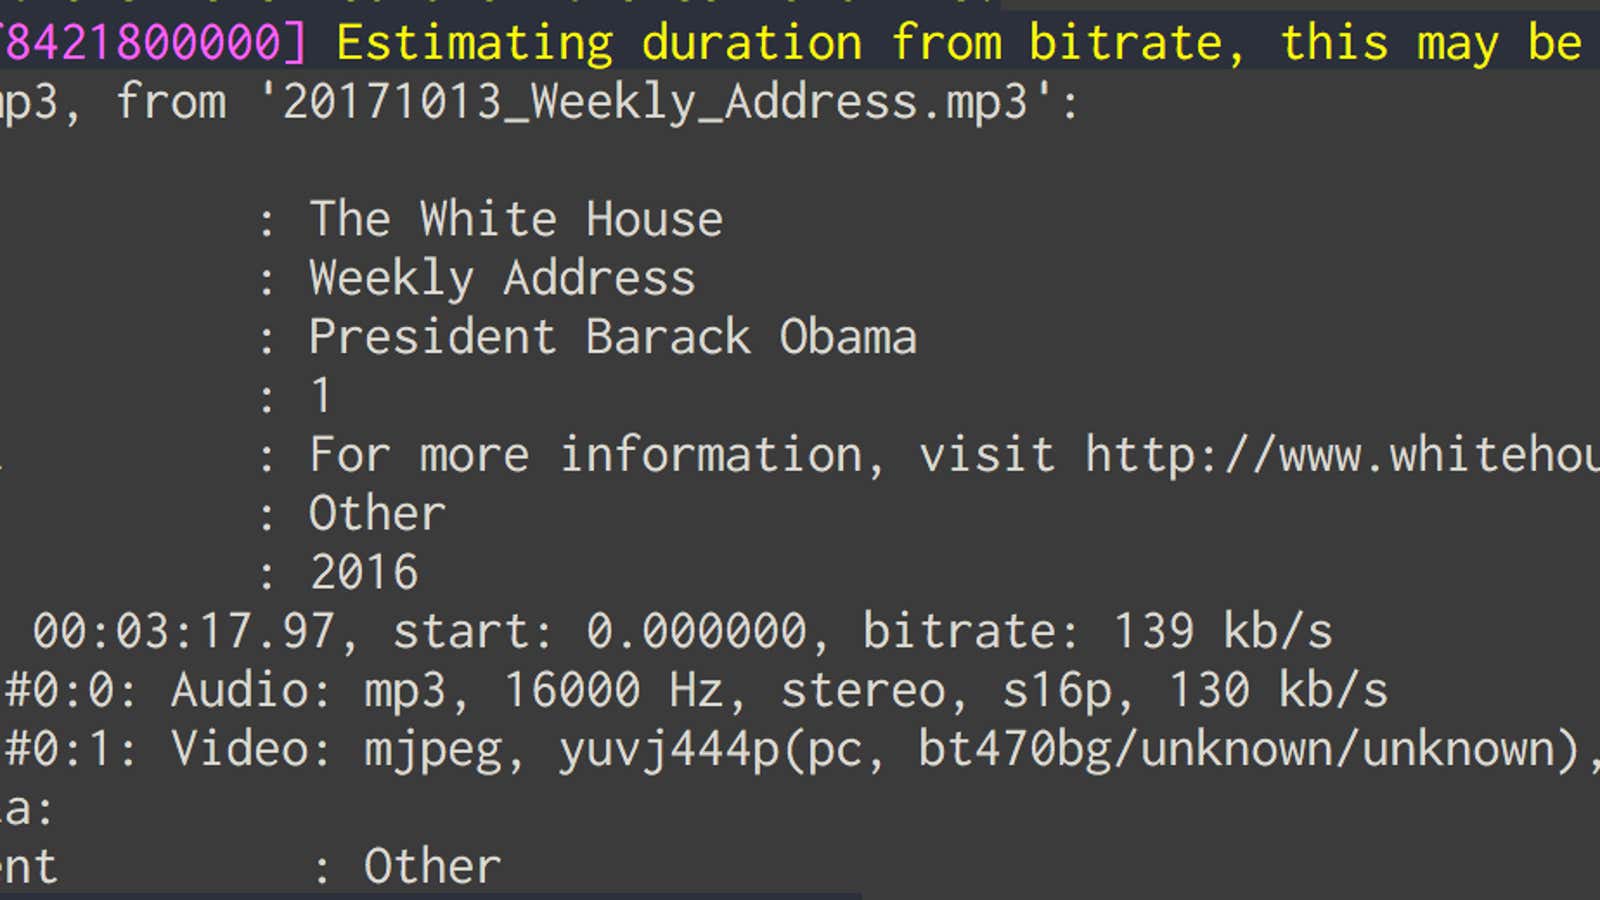 The mp3s for Trump’s weekly addresses say artist=Barack Obama